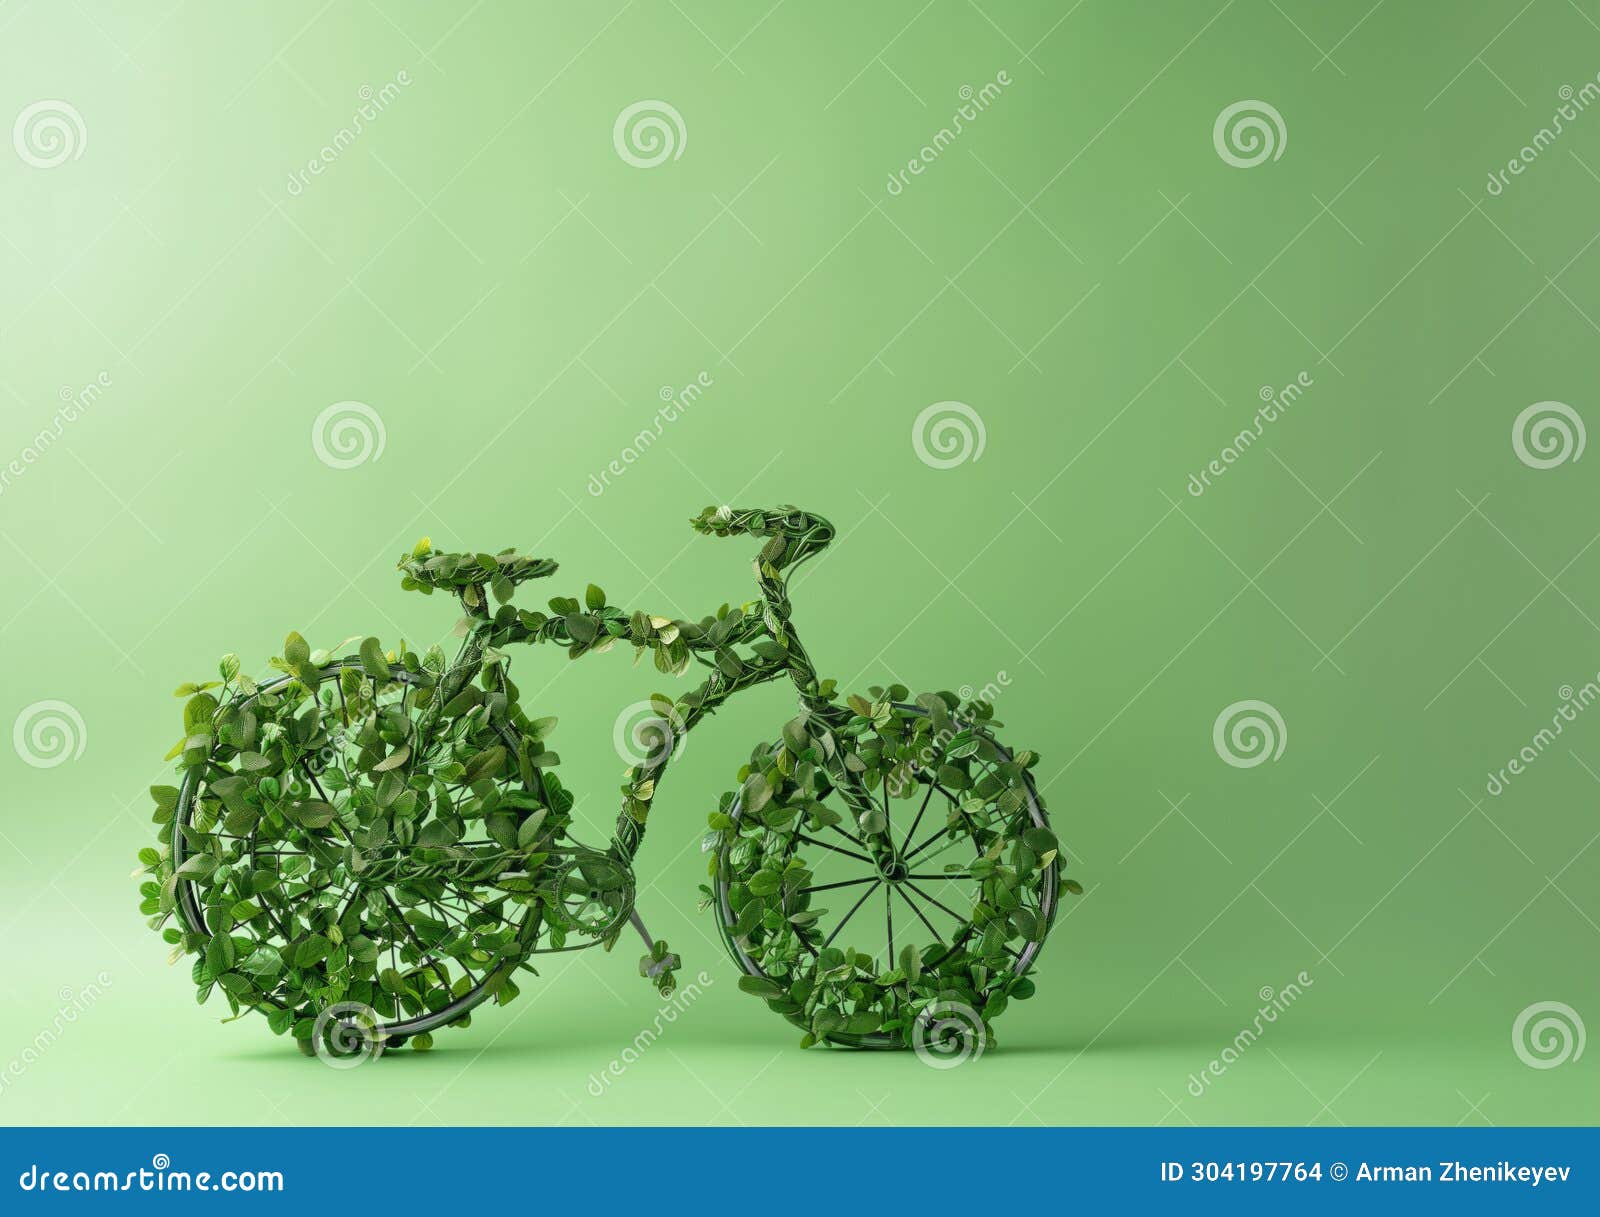 model of bicycle made of leaves and plants against a green wall. earth day and environmentalism concept